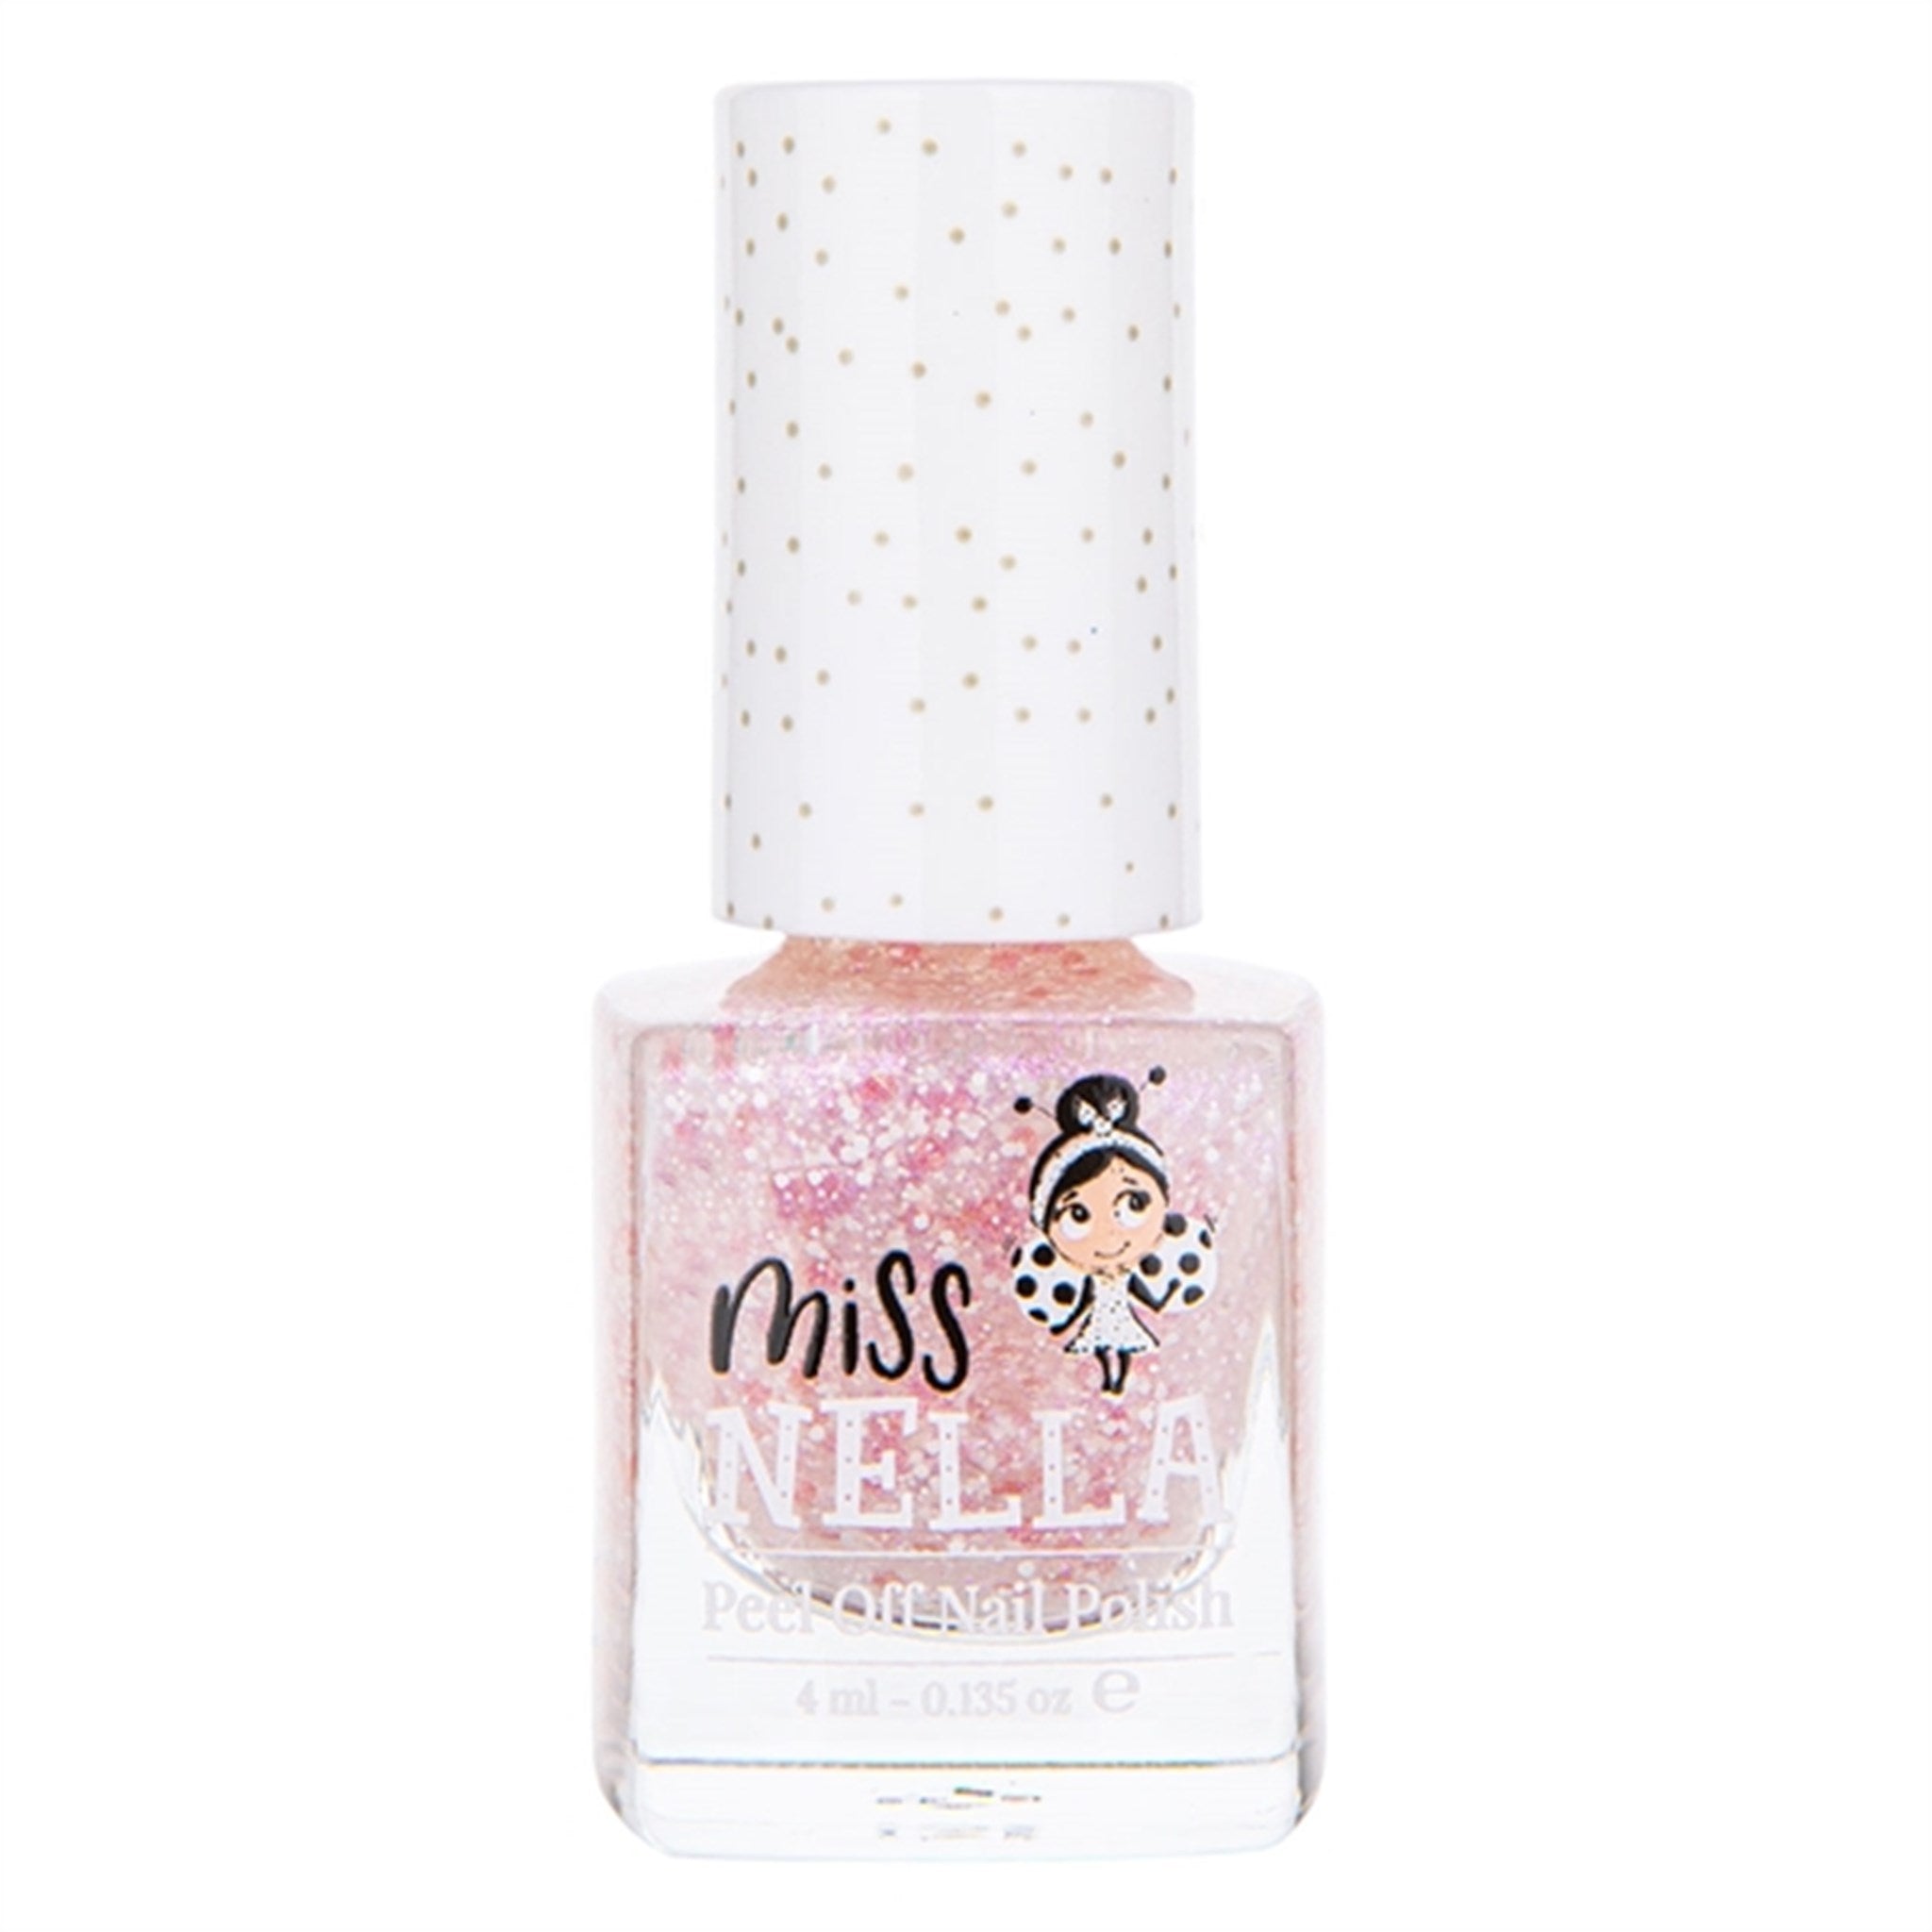 Miss Nella Nail Polish Happily Ever After